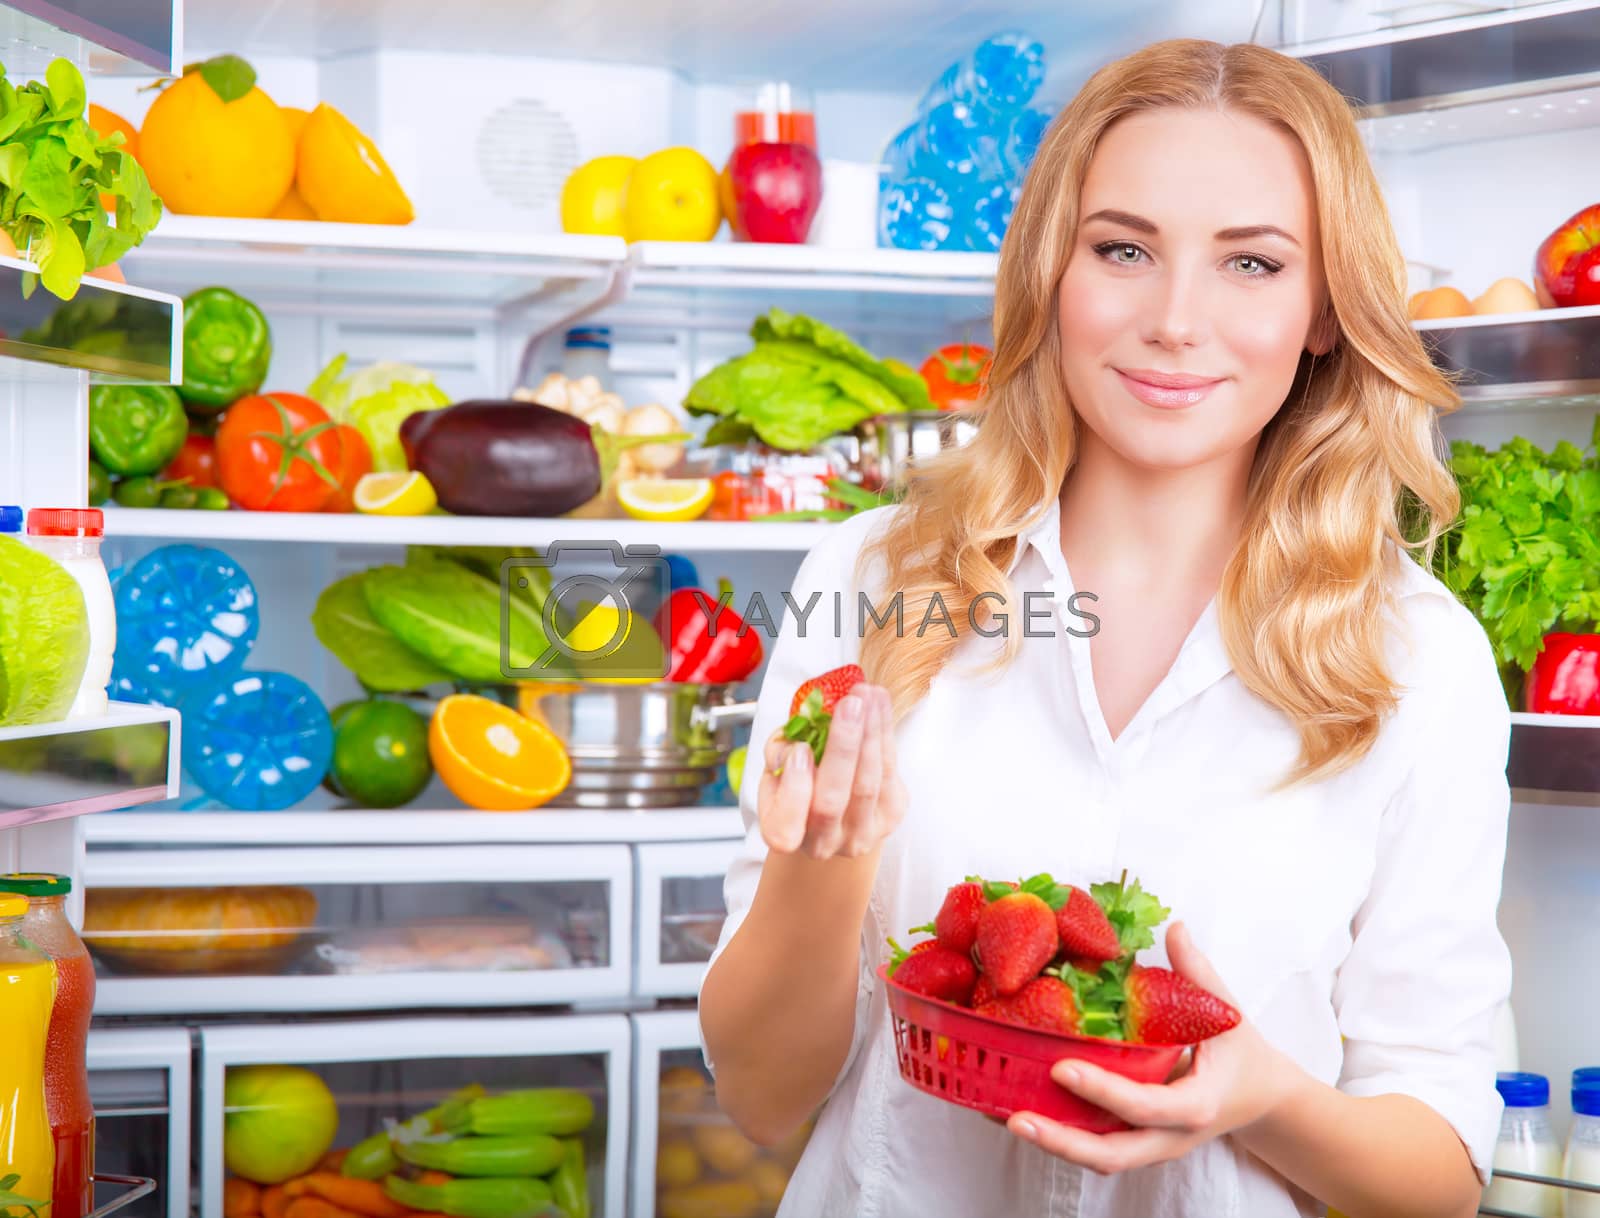 Royalty free image of Healthy eating concept by Anna_Omelchenko